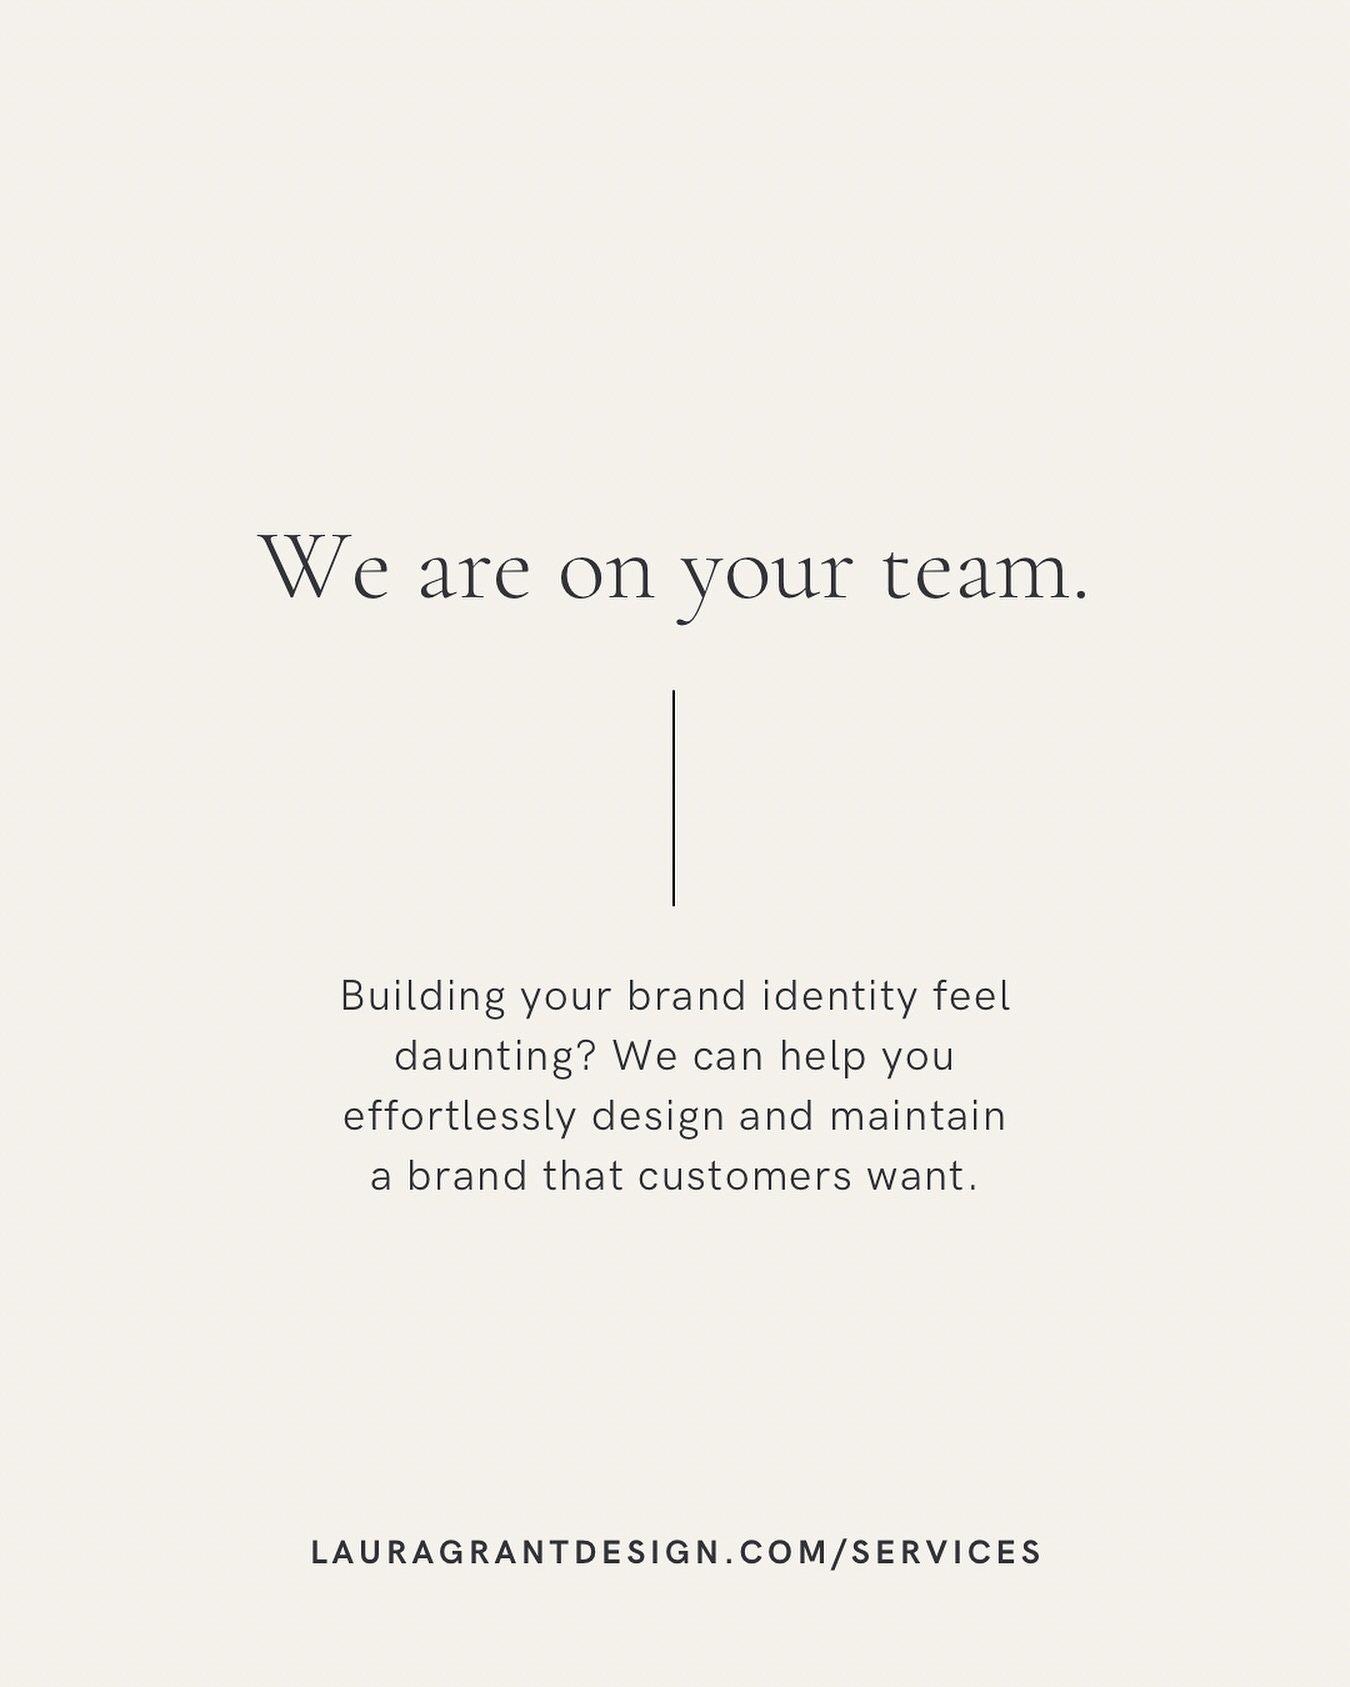 We&rsquo;re More Than Just a Service, We&rsquo;re Part of Your Team!

At Laura Grant Design, we dive deep into the heart of your business, ensuring that your mission isn&rsquo;t just understood&mdash;it&rsquo;s felt by everyone who encounters your br